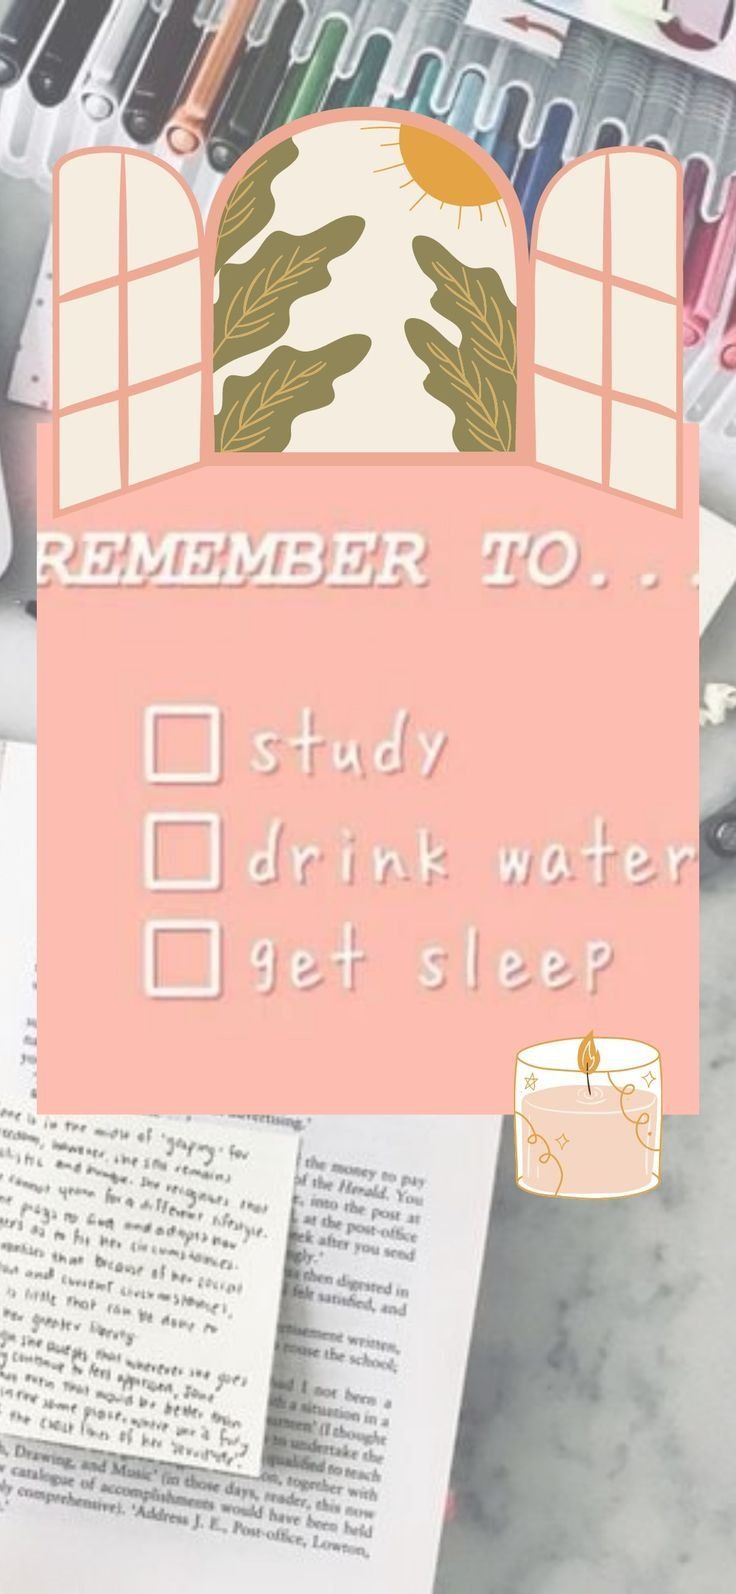 A pink and white image with a reminder to study, drink water, and get sleep. - School